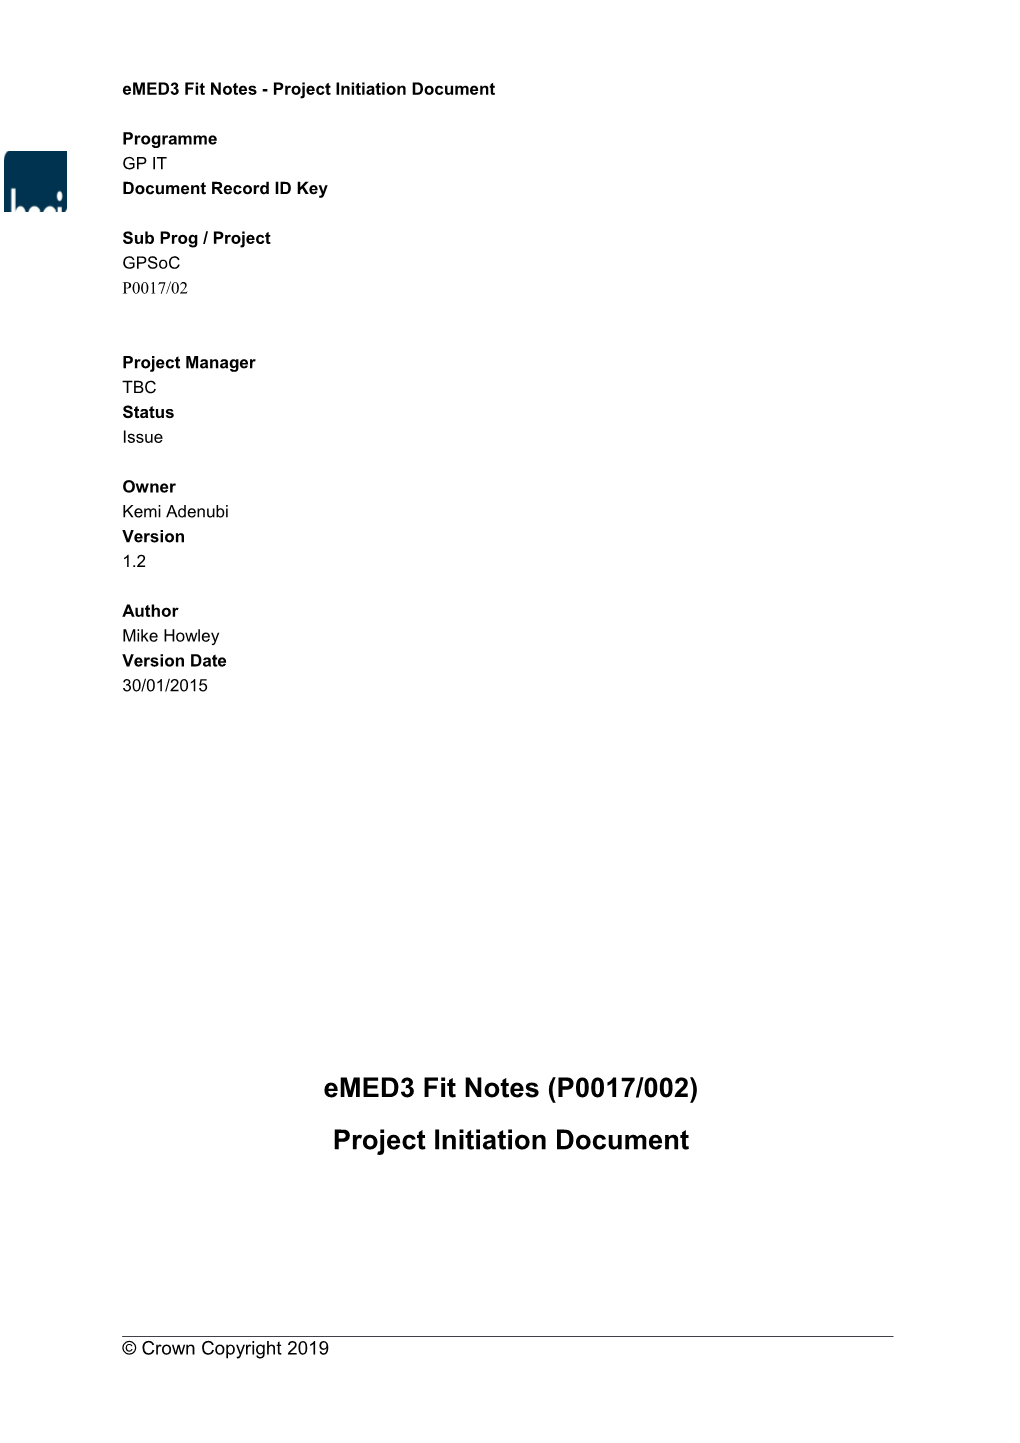 Emed3 Fit Notes - Project Initiation Document